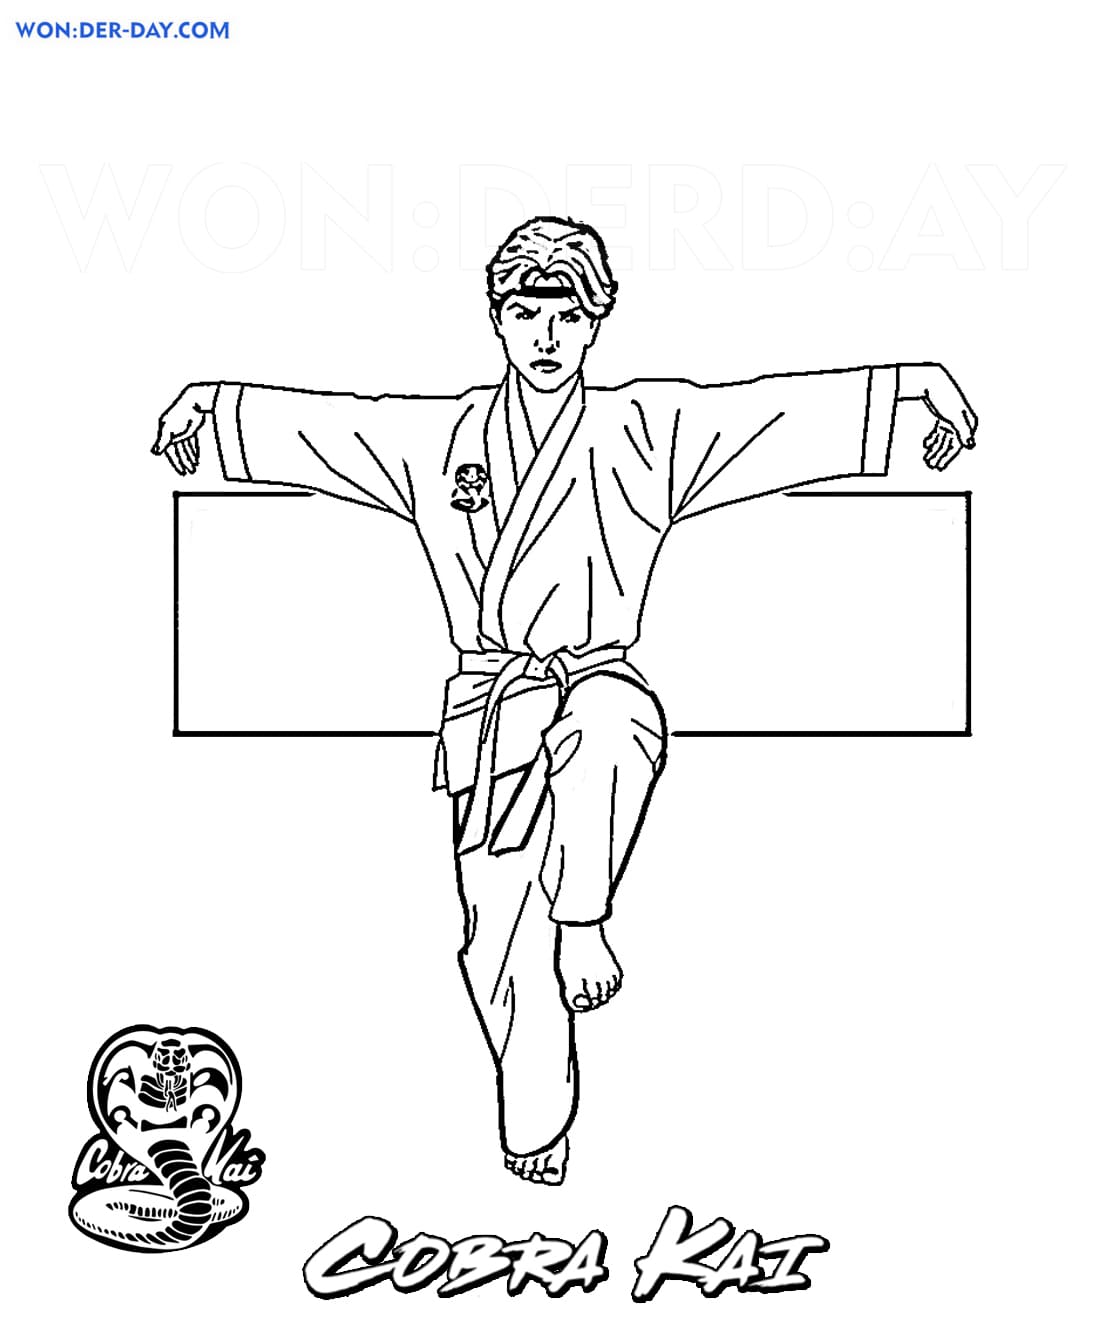 Cobra Kai Coloring pages Printable coloring pages WONDER DAY